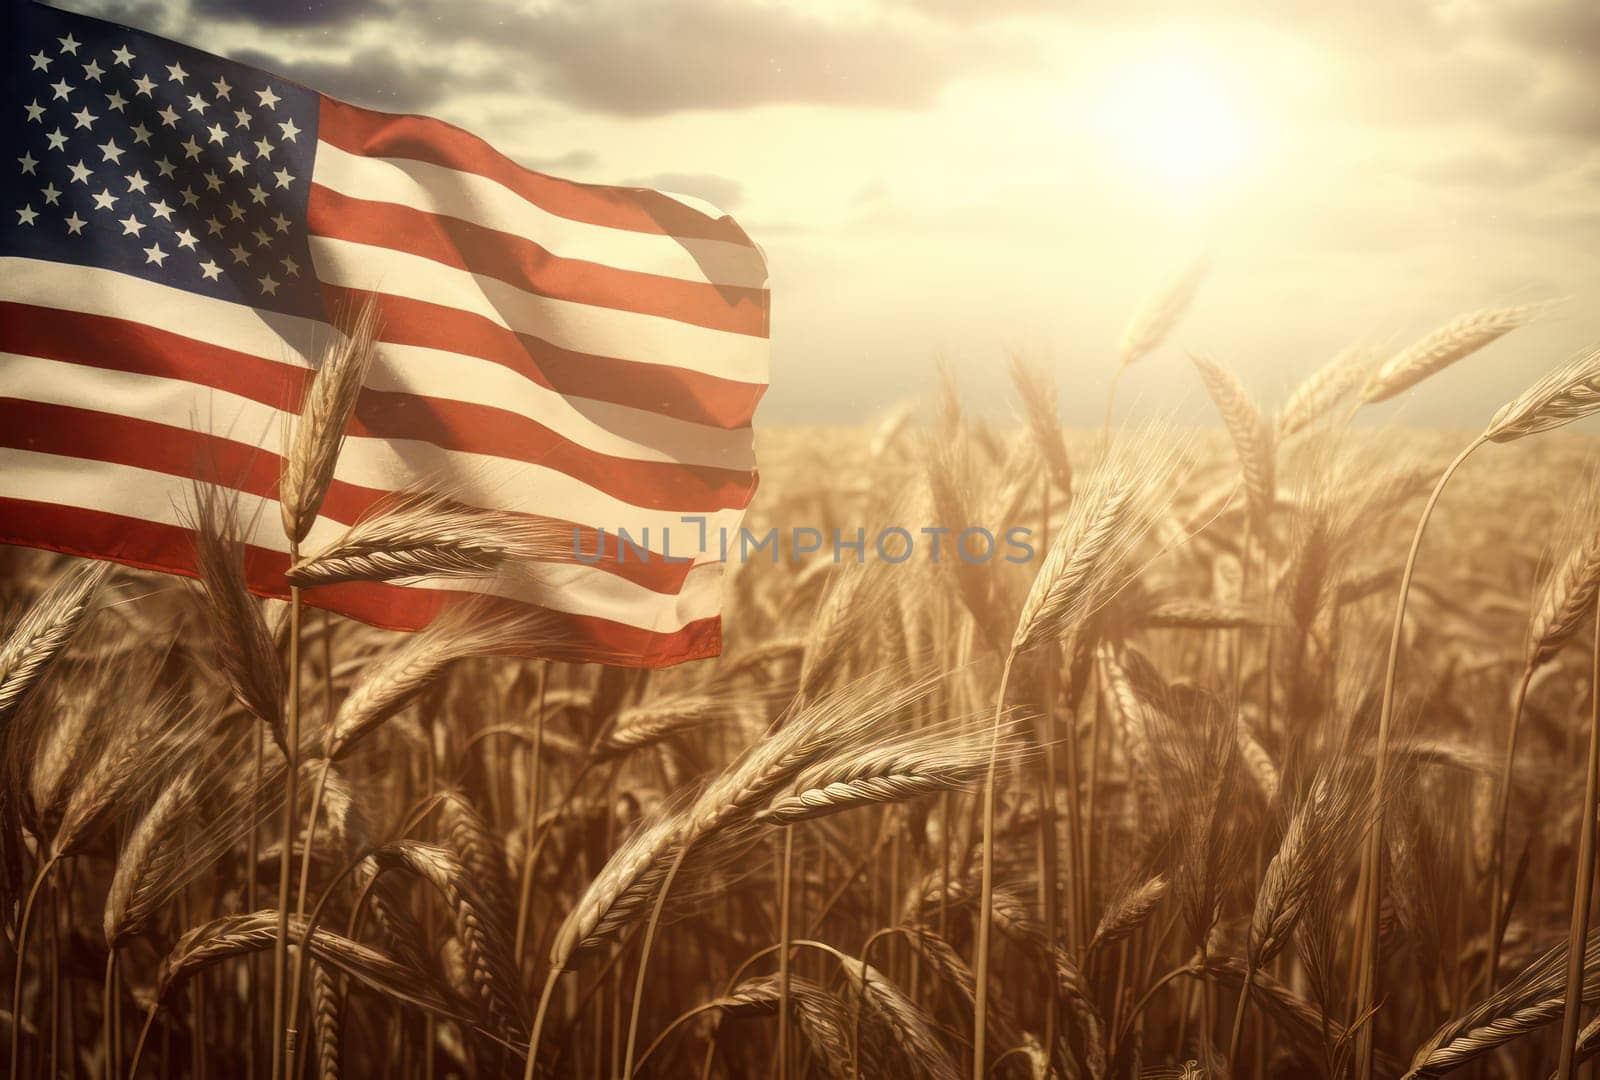 American Field of Patriotism: A Young Woman Holding the US Flag, Surrounded by Golden Wheat and Blue Sky